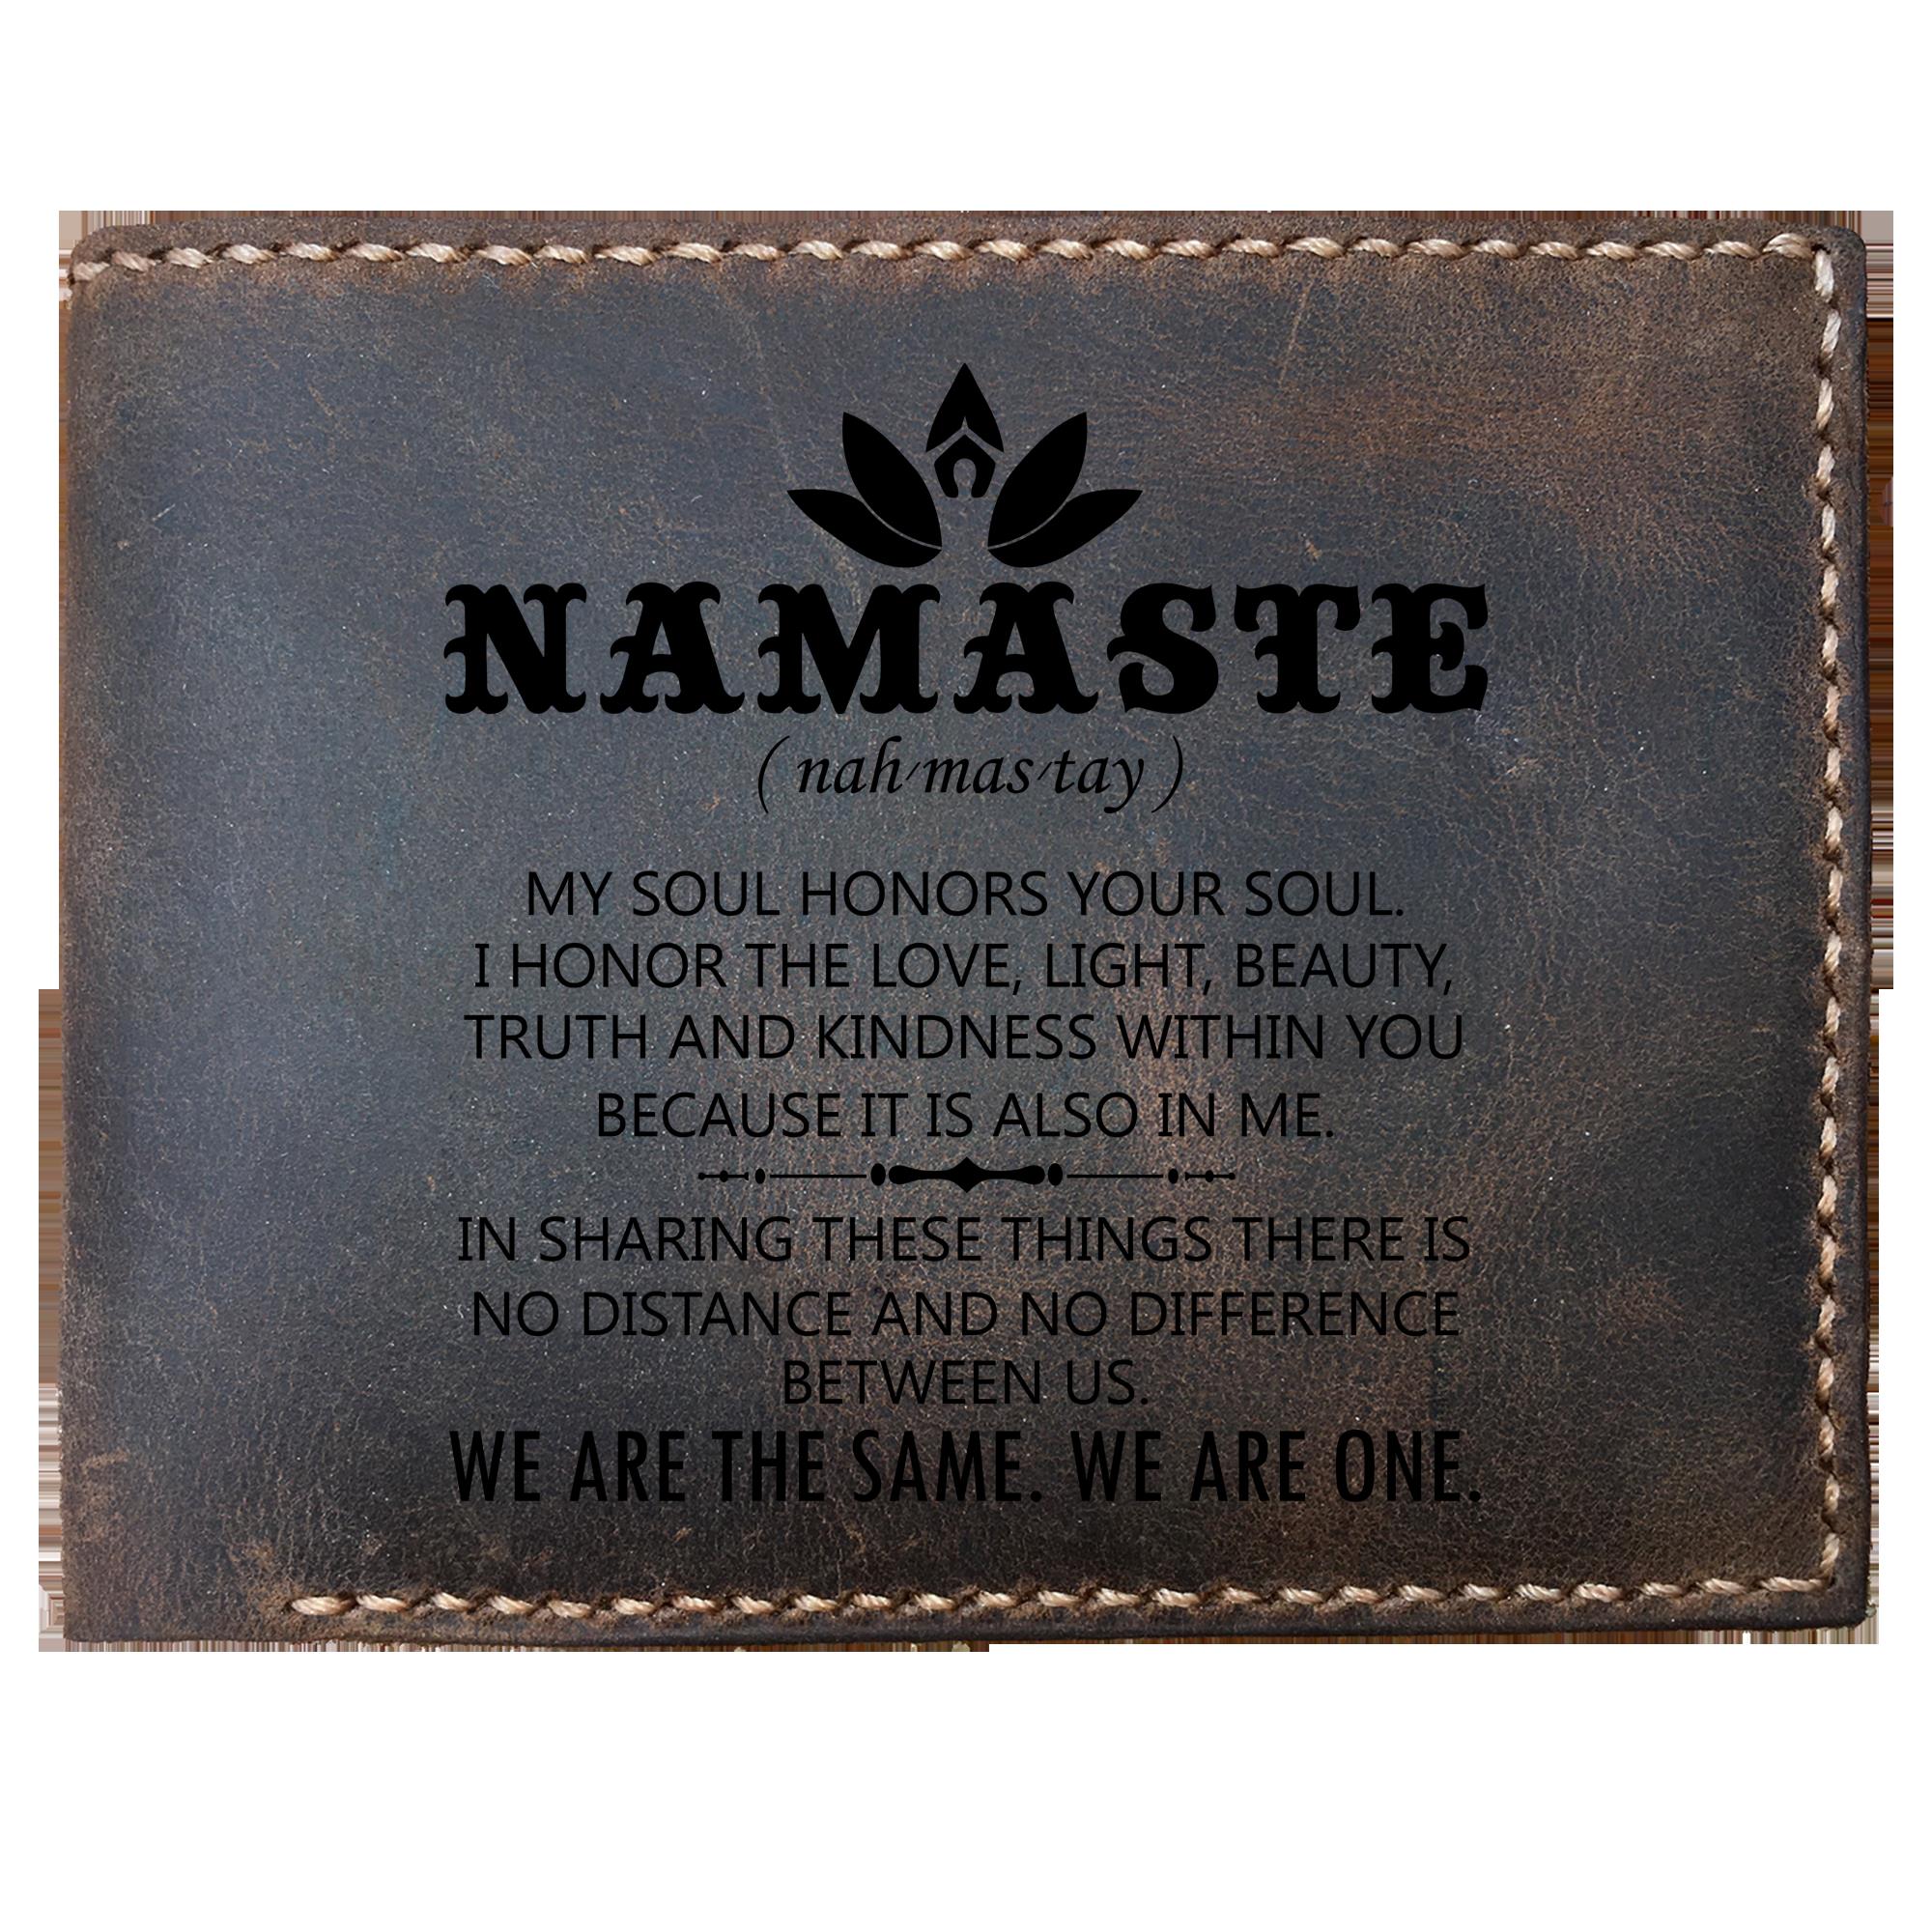 Skitongifts Funny Custom Laser Engraved Bifold Leather Wallet For Men, Funny Yoga My Soul Honors Your Soul Namaste